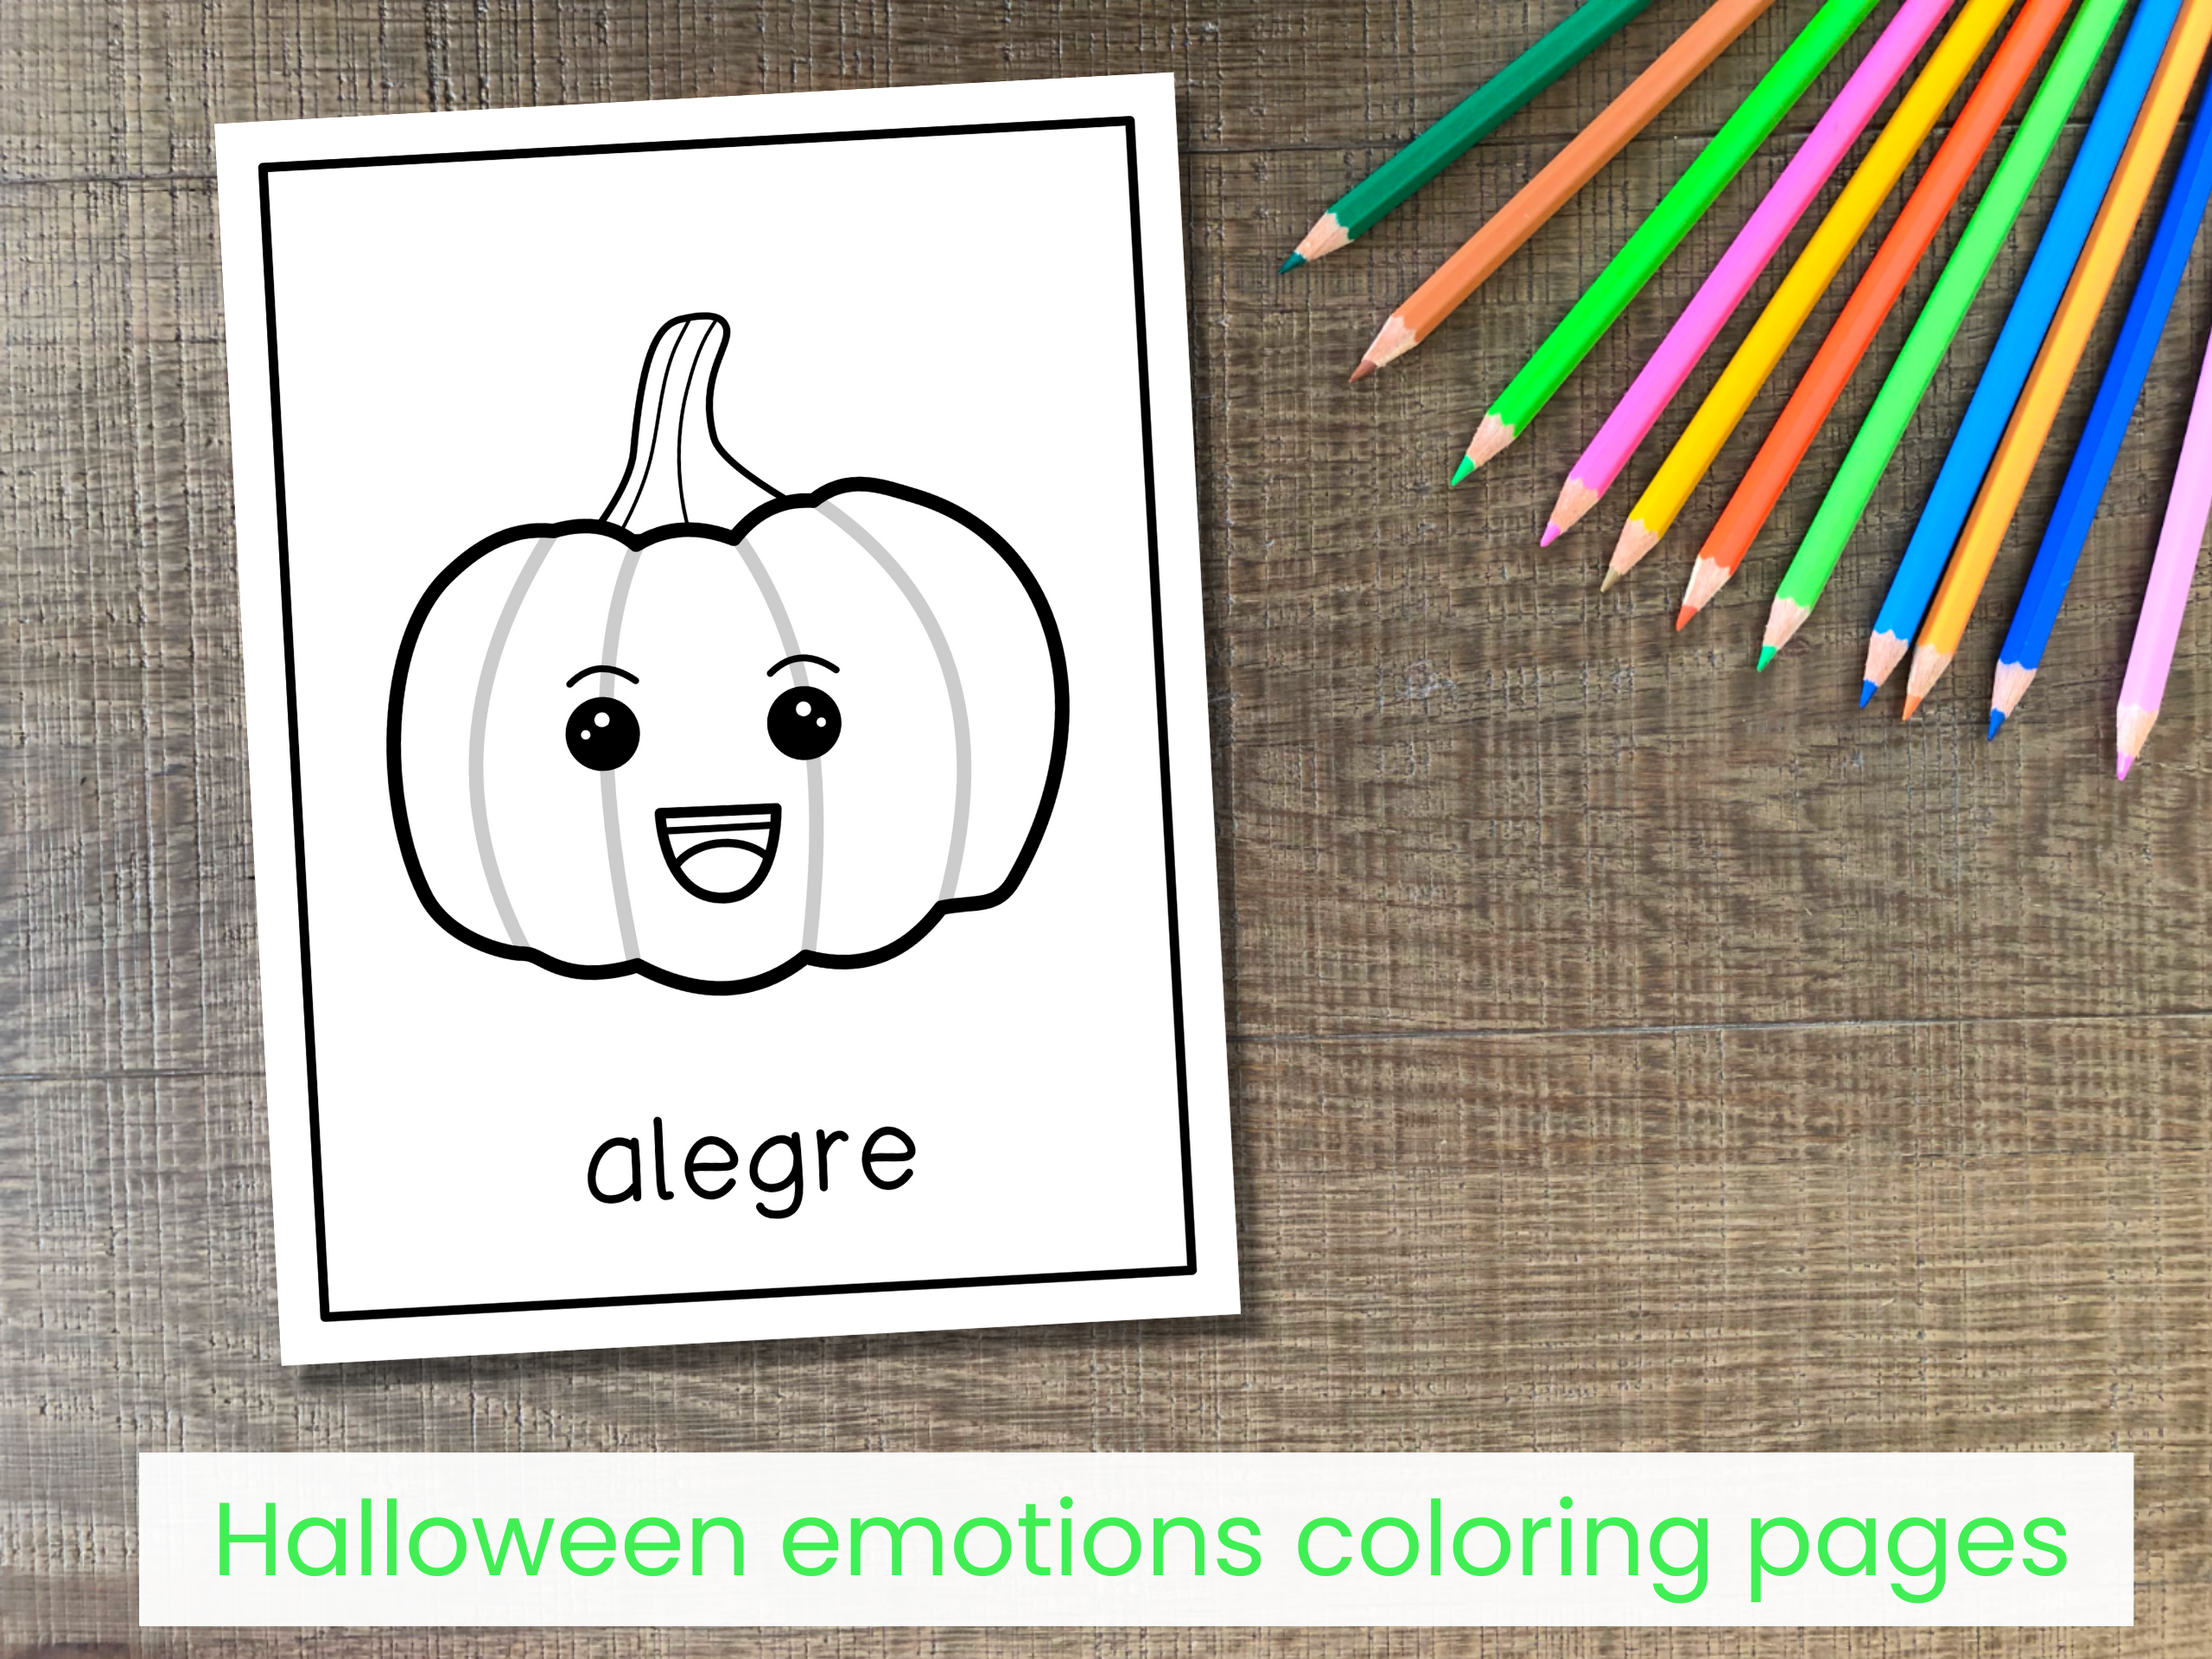 Halloween emotions coloring pages